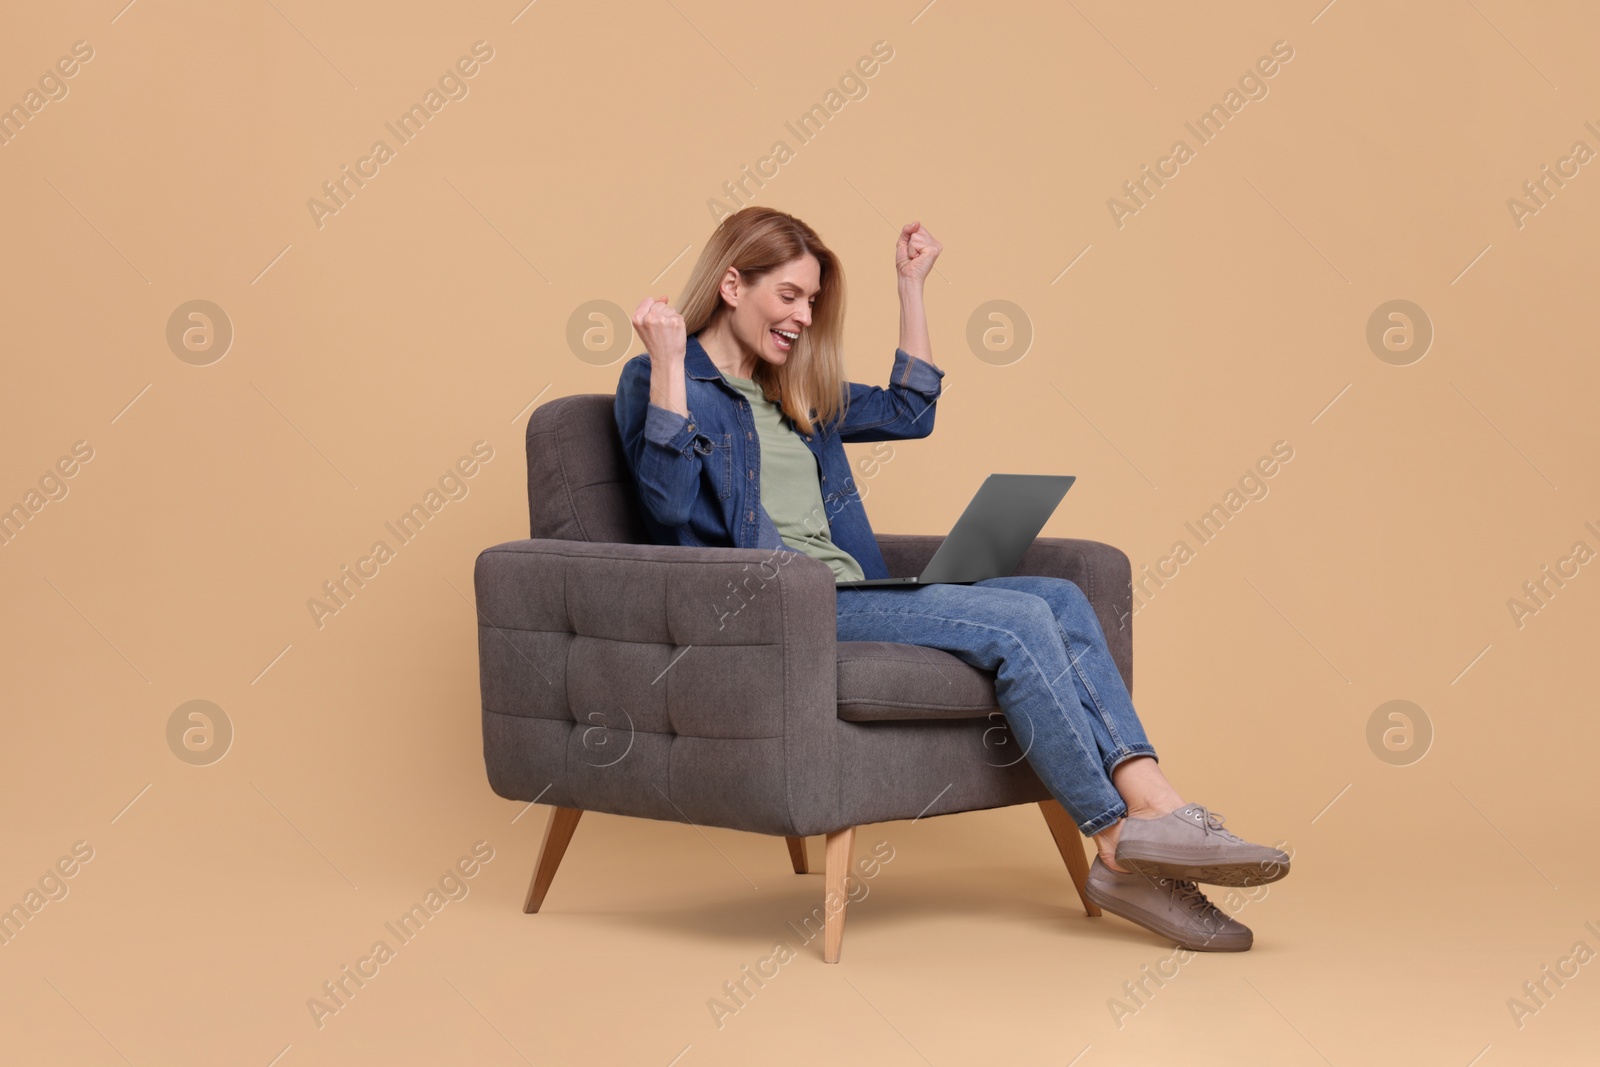 Photo of Emotional woman with laptop sitting in armchair on beige background